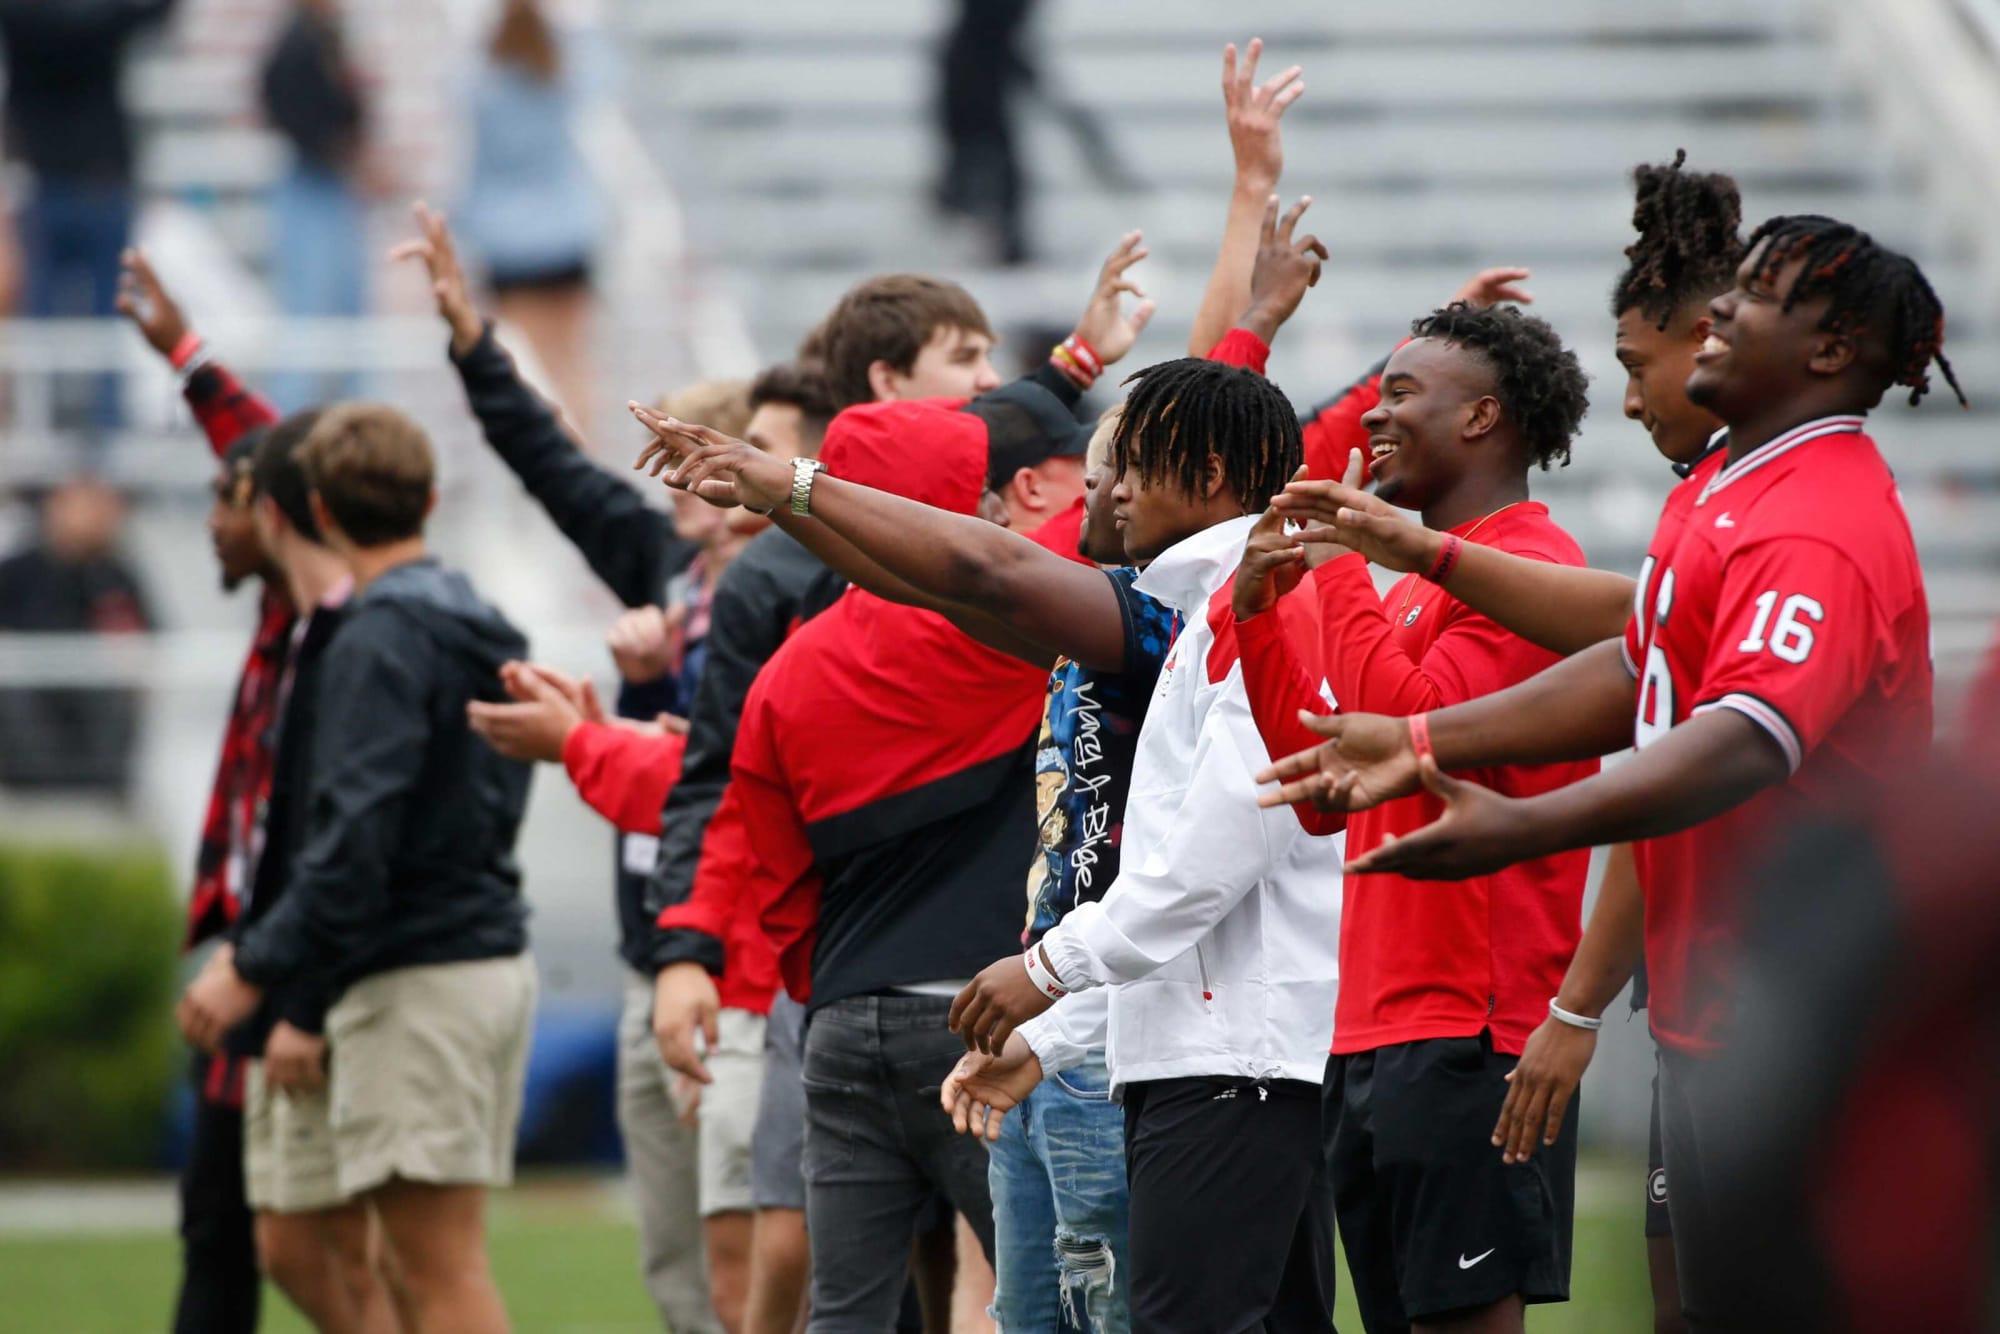 football could easily build recruiting momentum off GDay